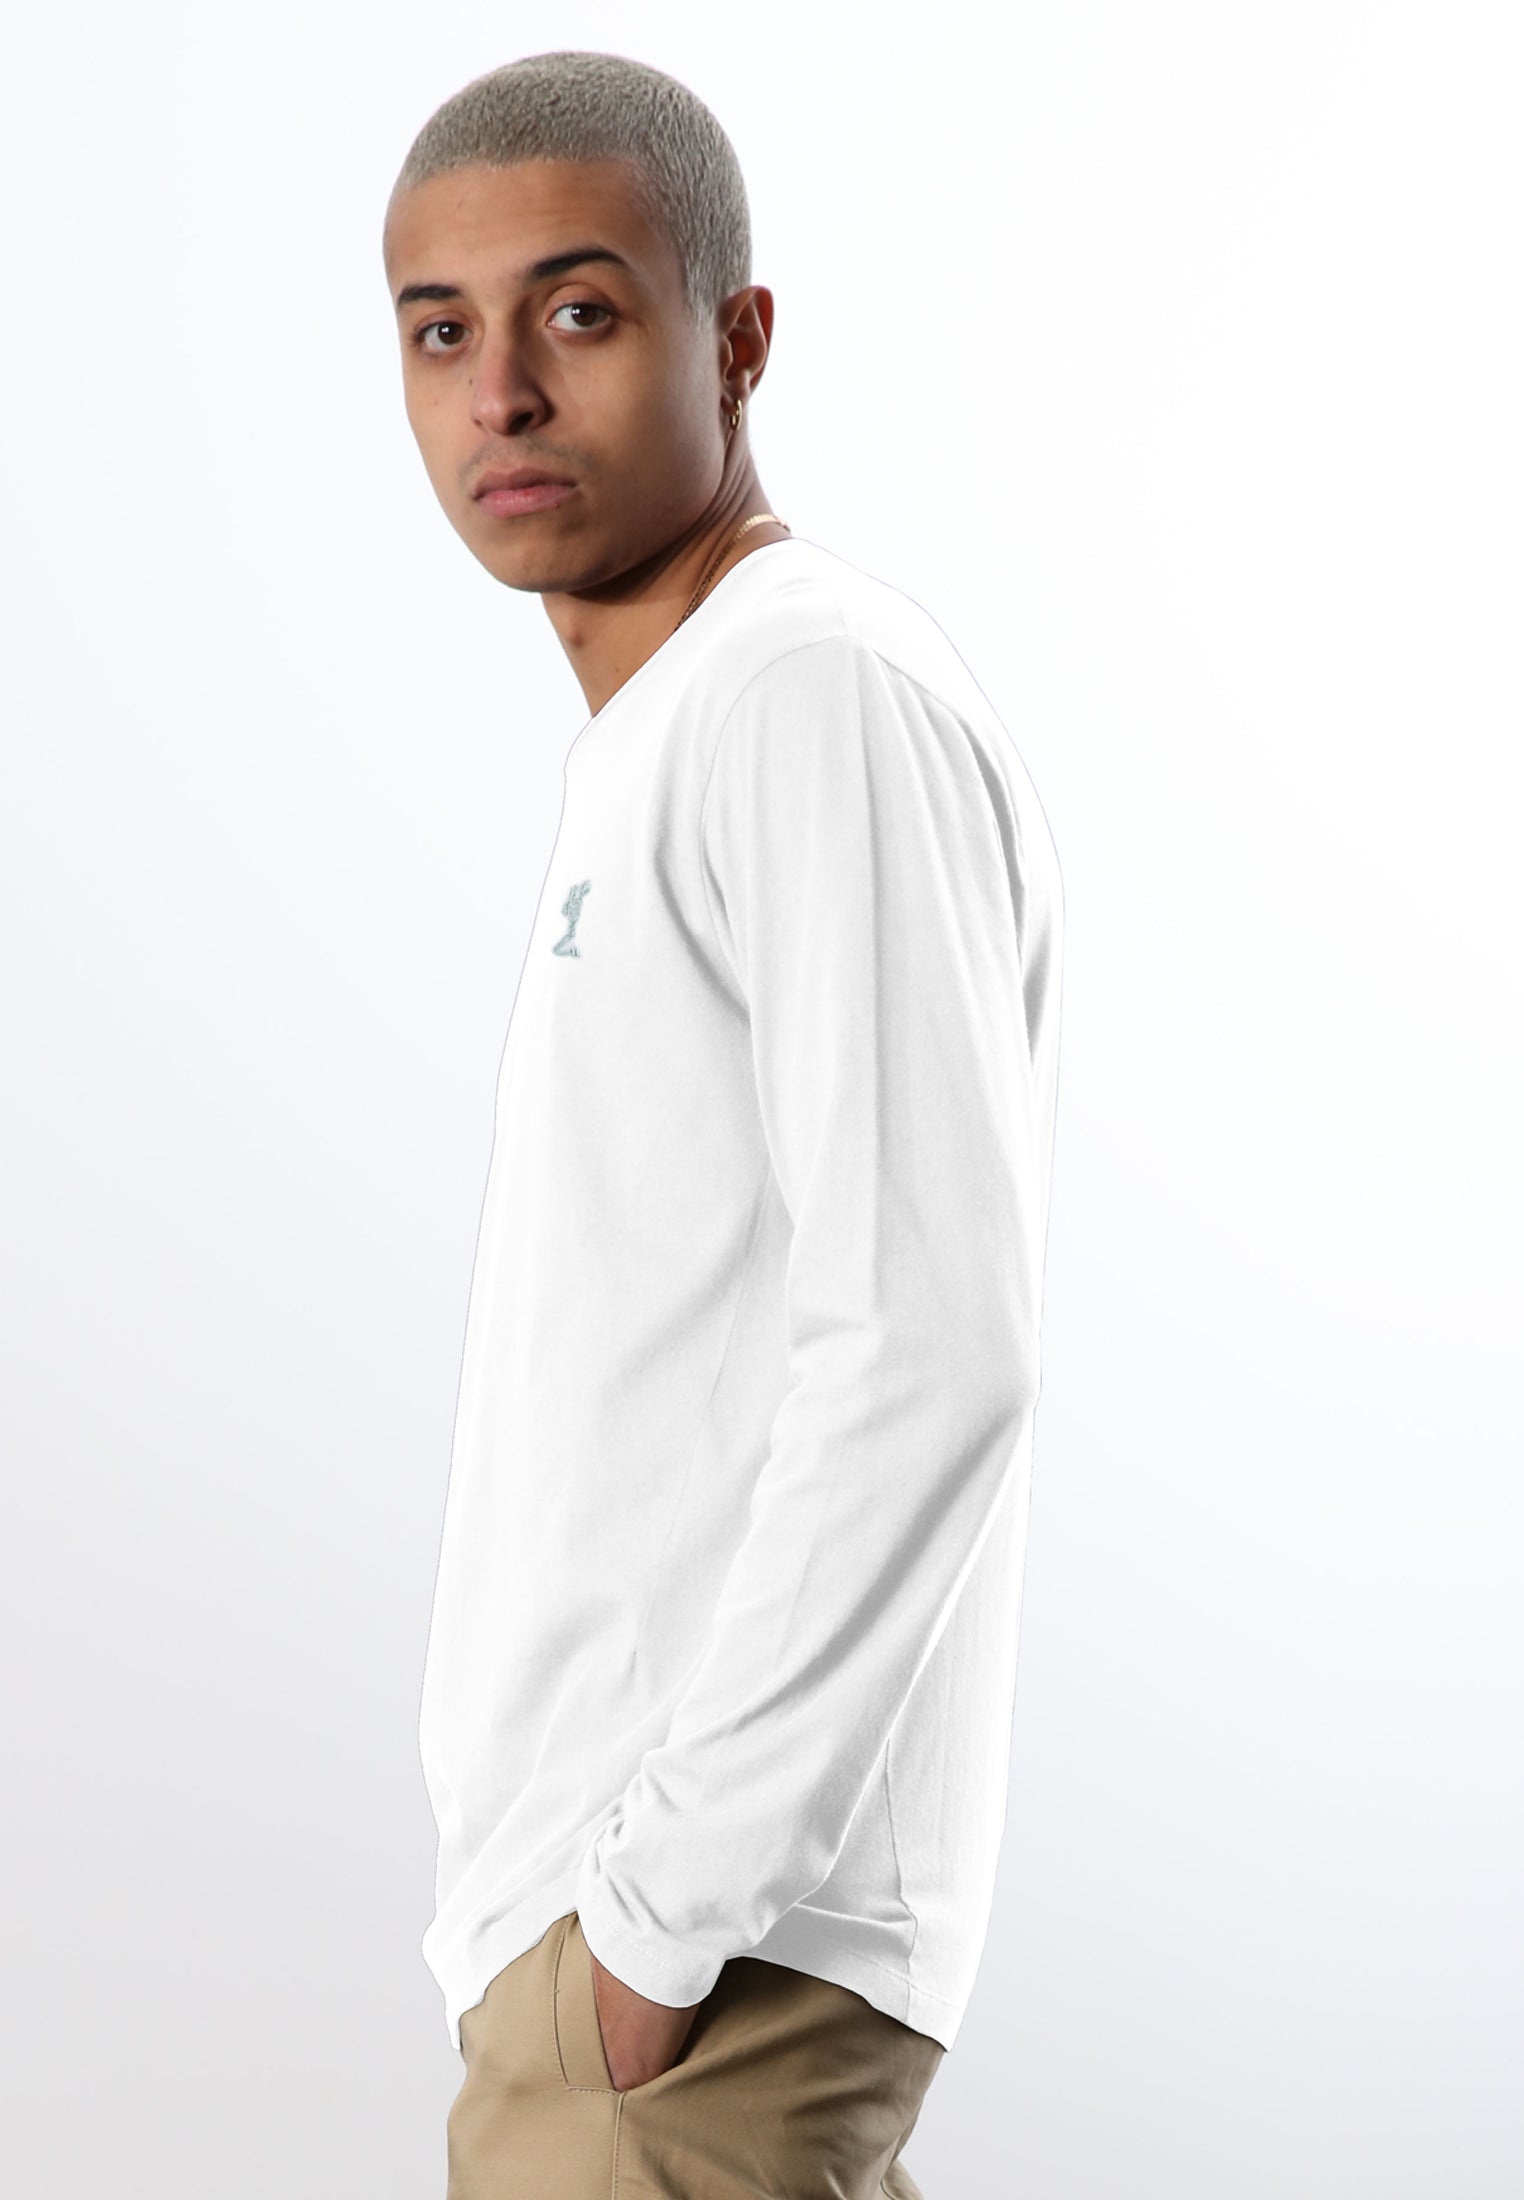 ESSENTIAL CORE WHITE LONG SLEEVE T-SHIRT